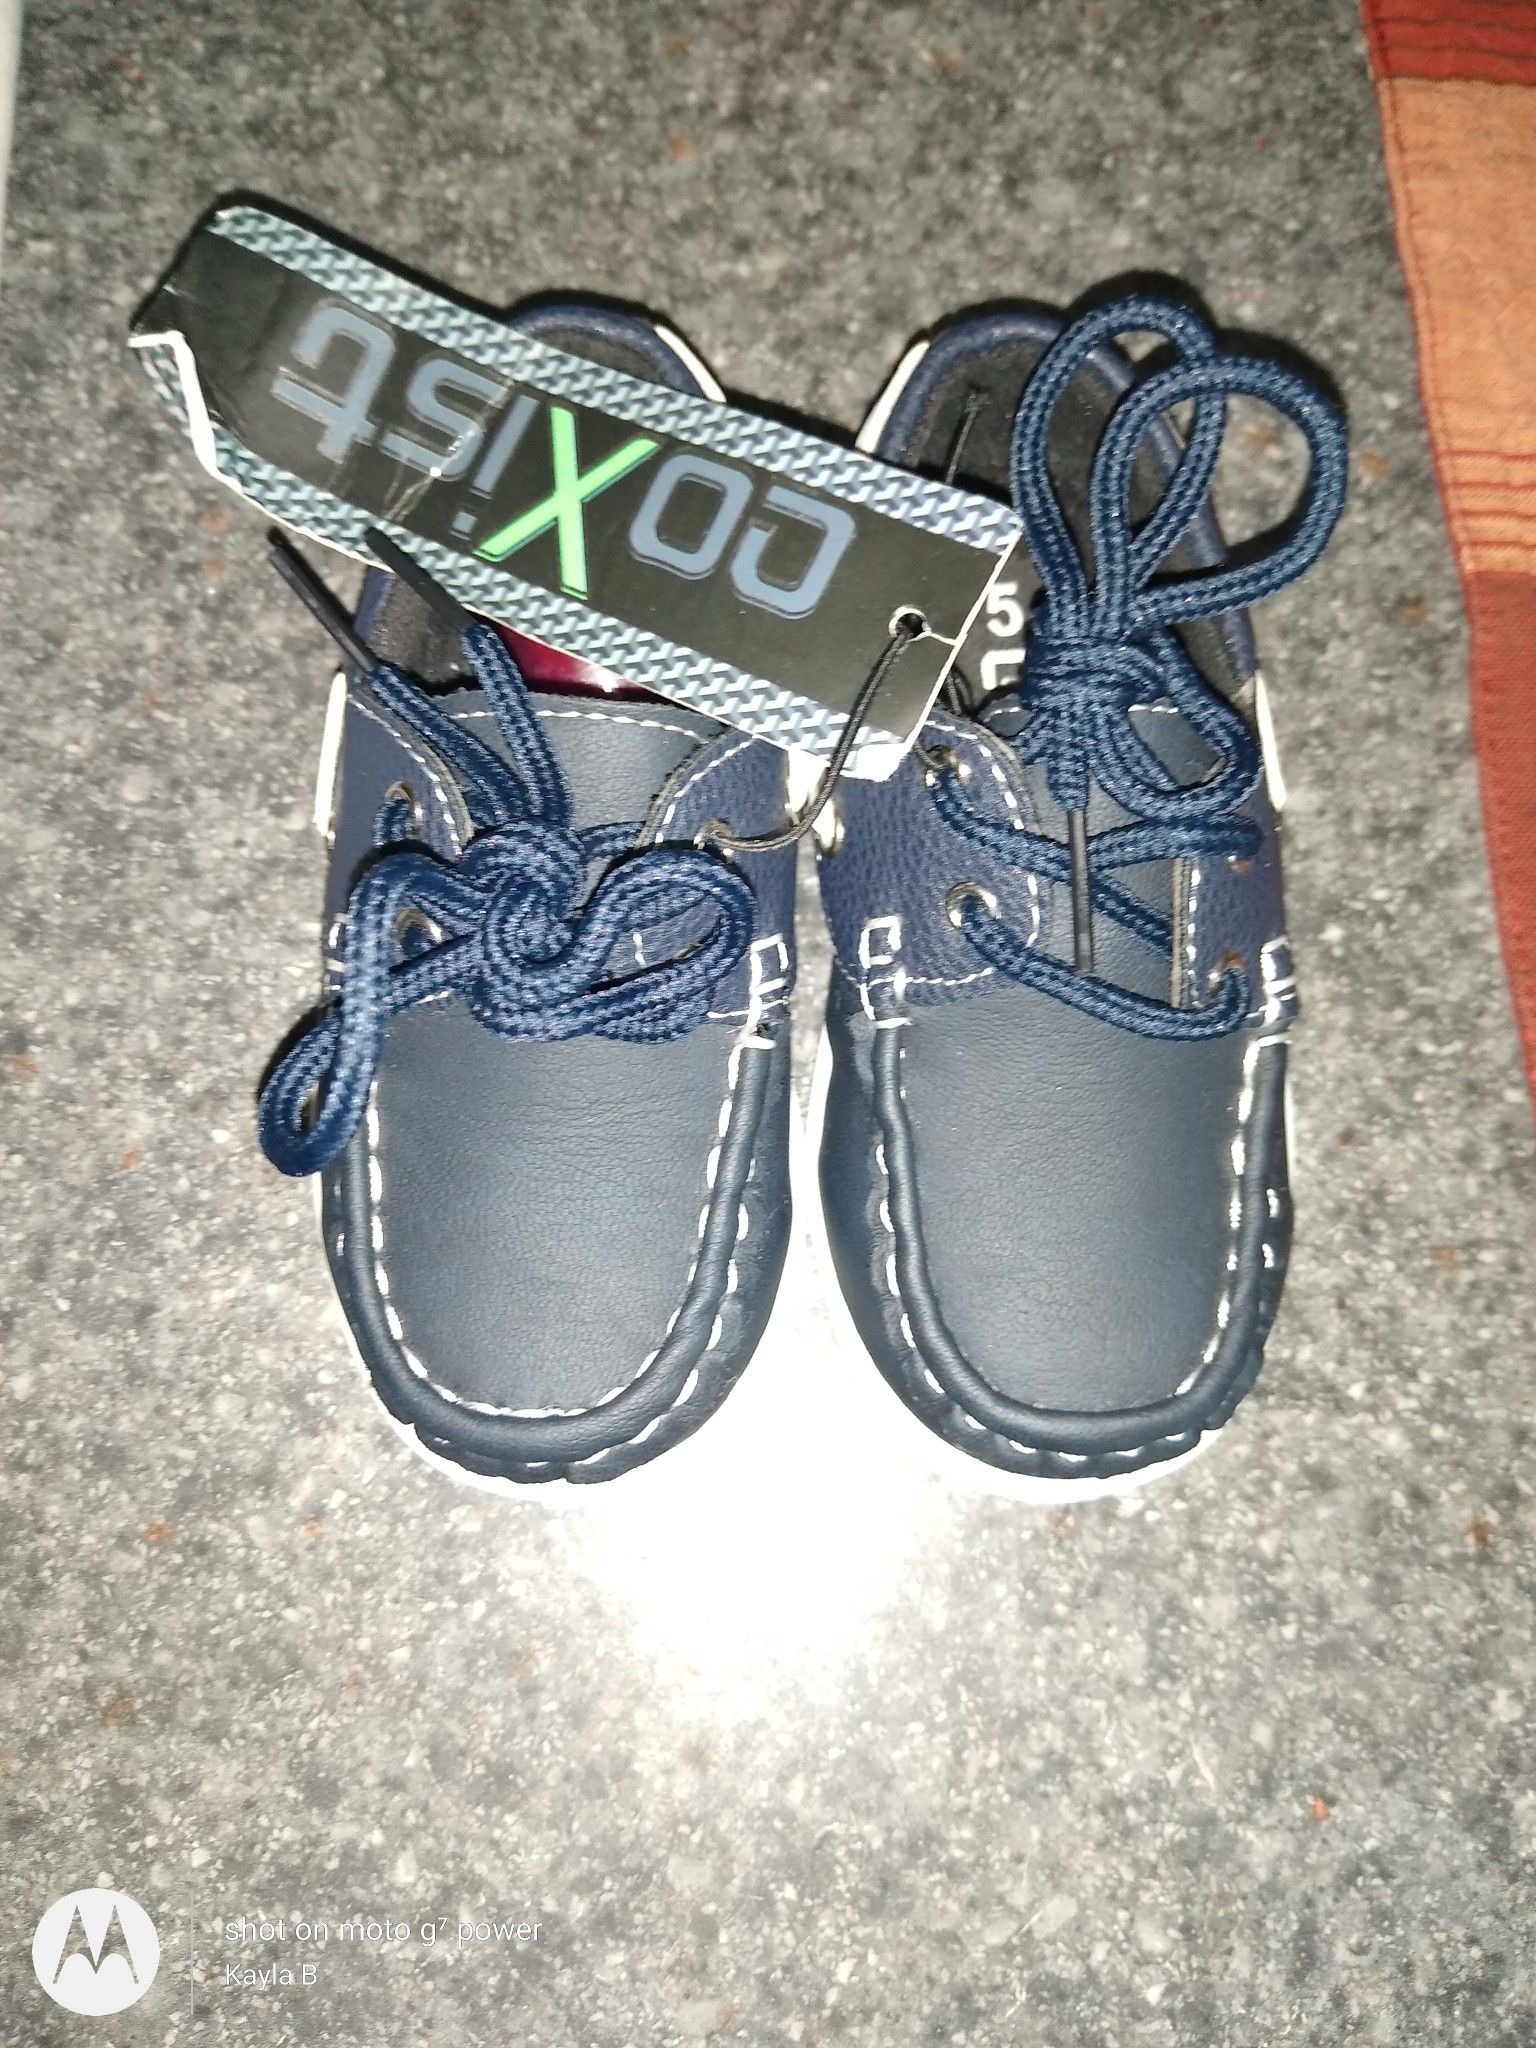 Brand new toddler shoes size 5